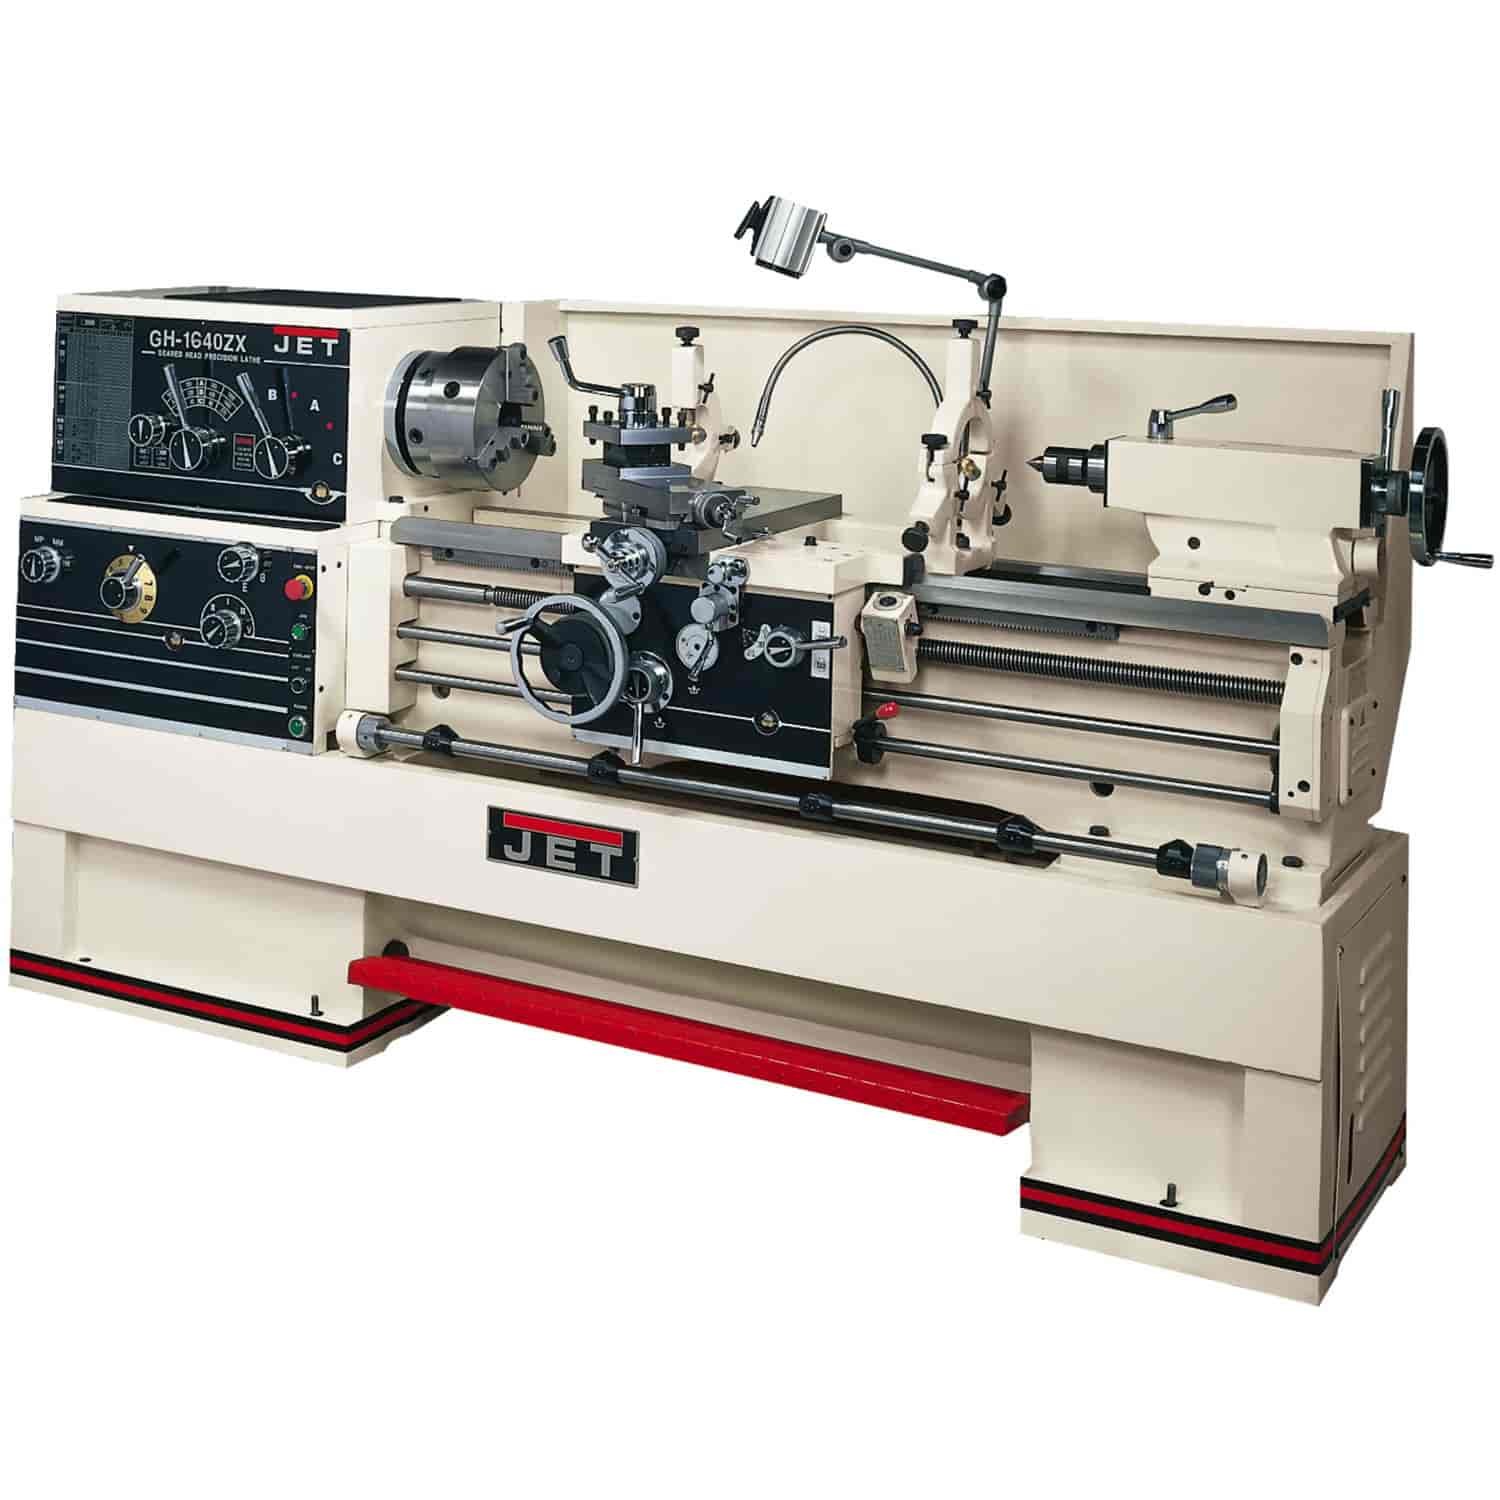 GH-1860ZX 3-1/8 Spindle Bore Geared Head Lathe